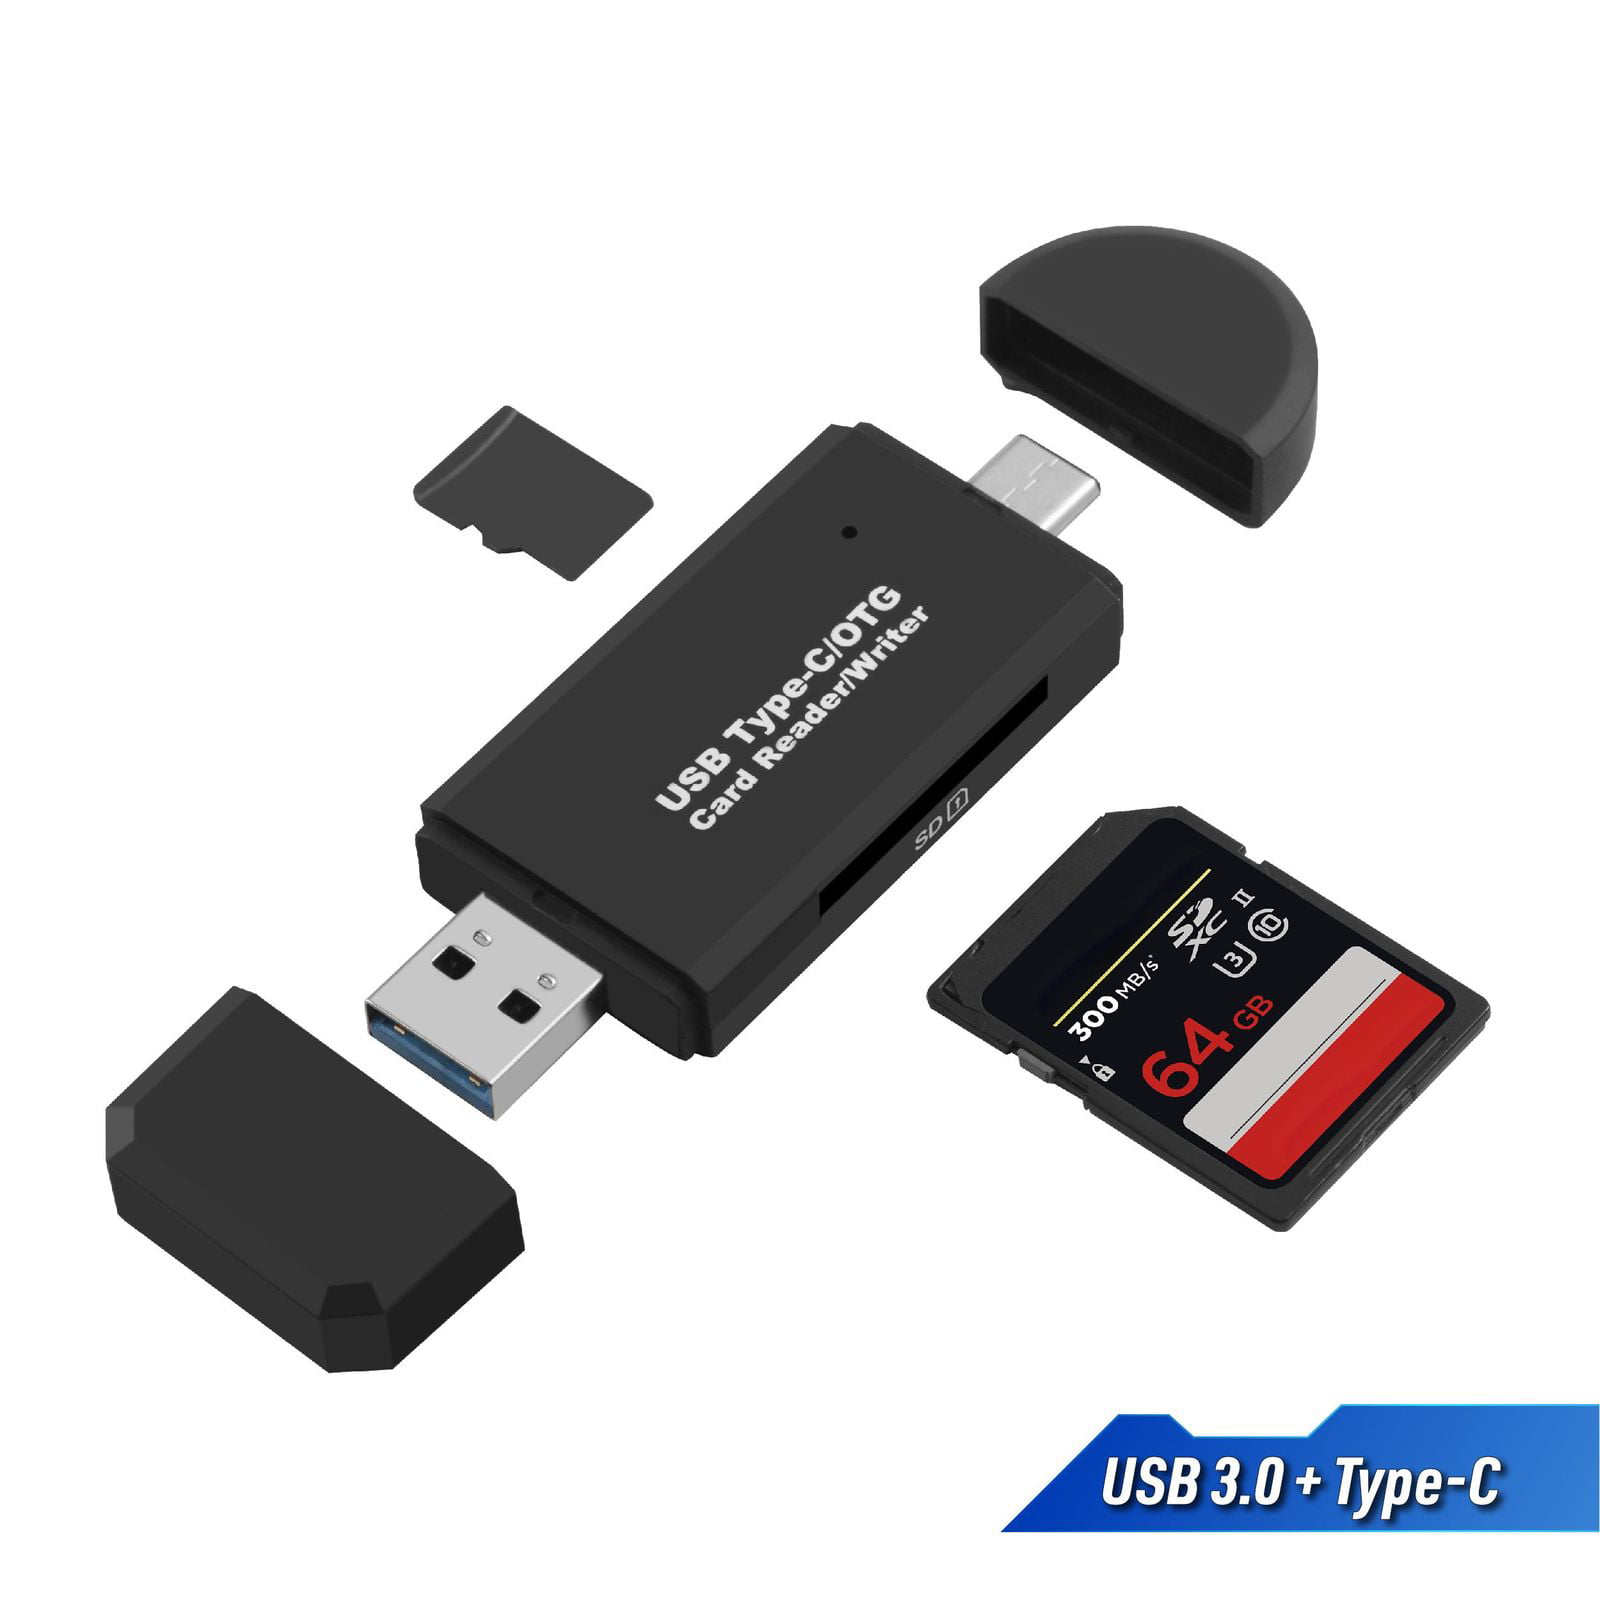 USB Type C SD Card Reader, USB 3.0 SD Card Reader OTG Adapter for SDXC, SDHC, RS-MMC, Micro SDXC, Micro SD, TF, SDHC Card and UHS-I for Mac OS